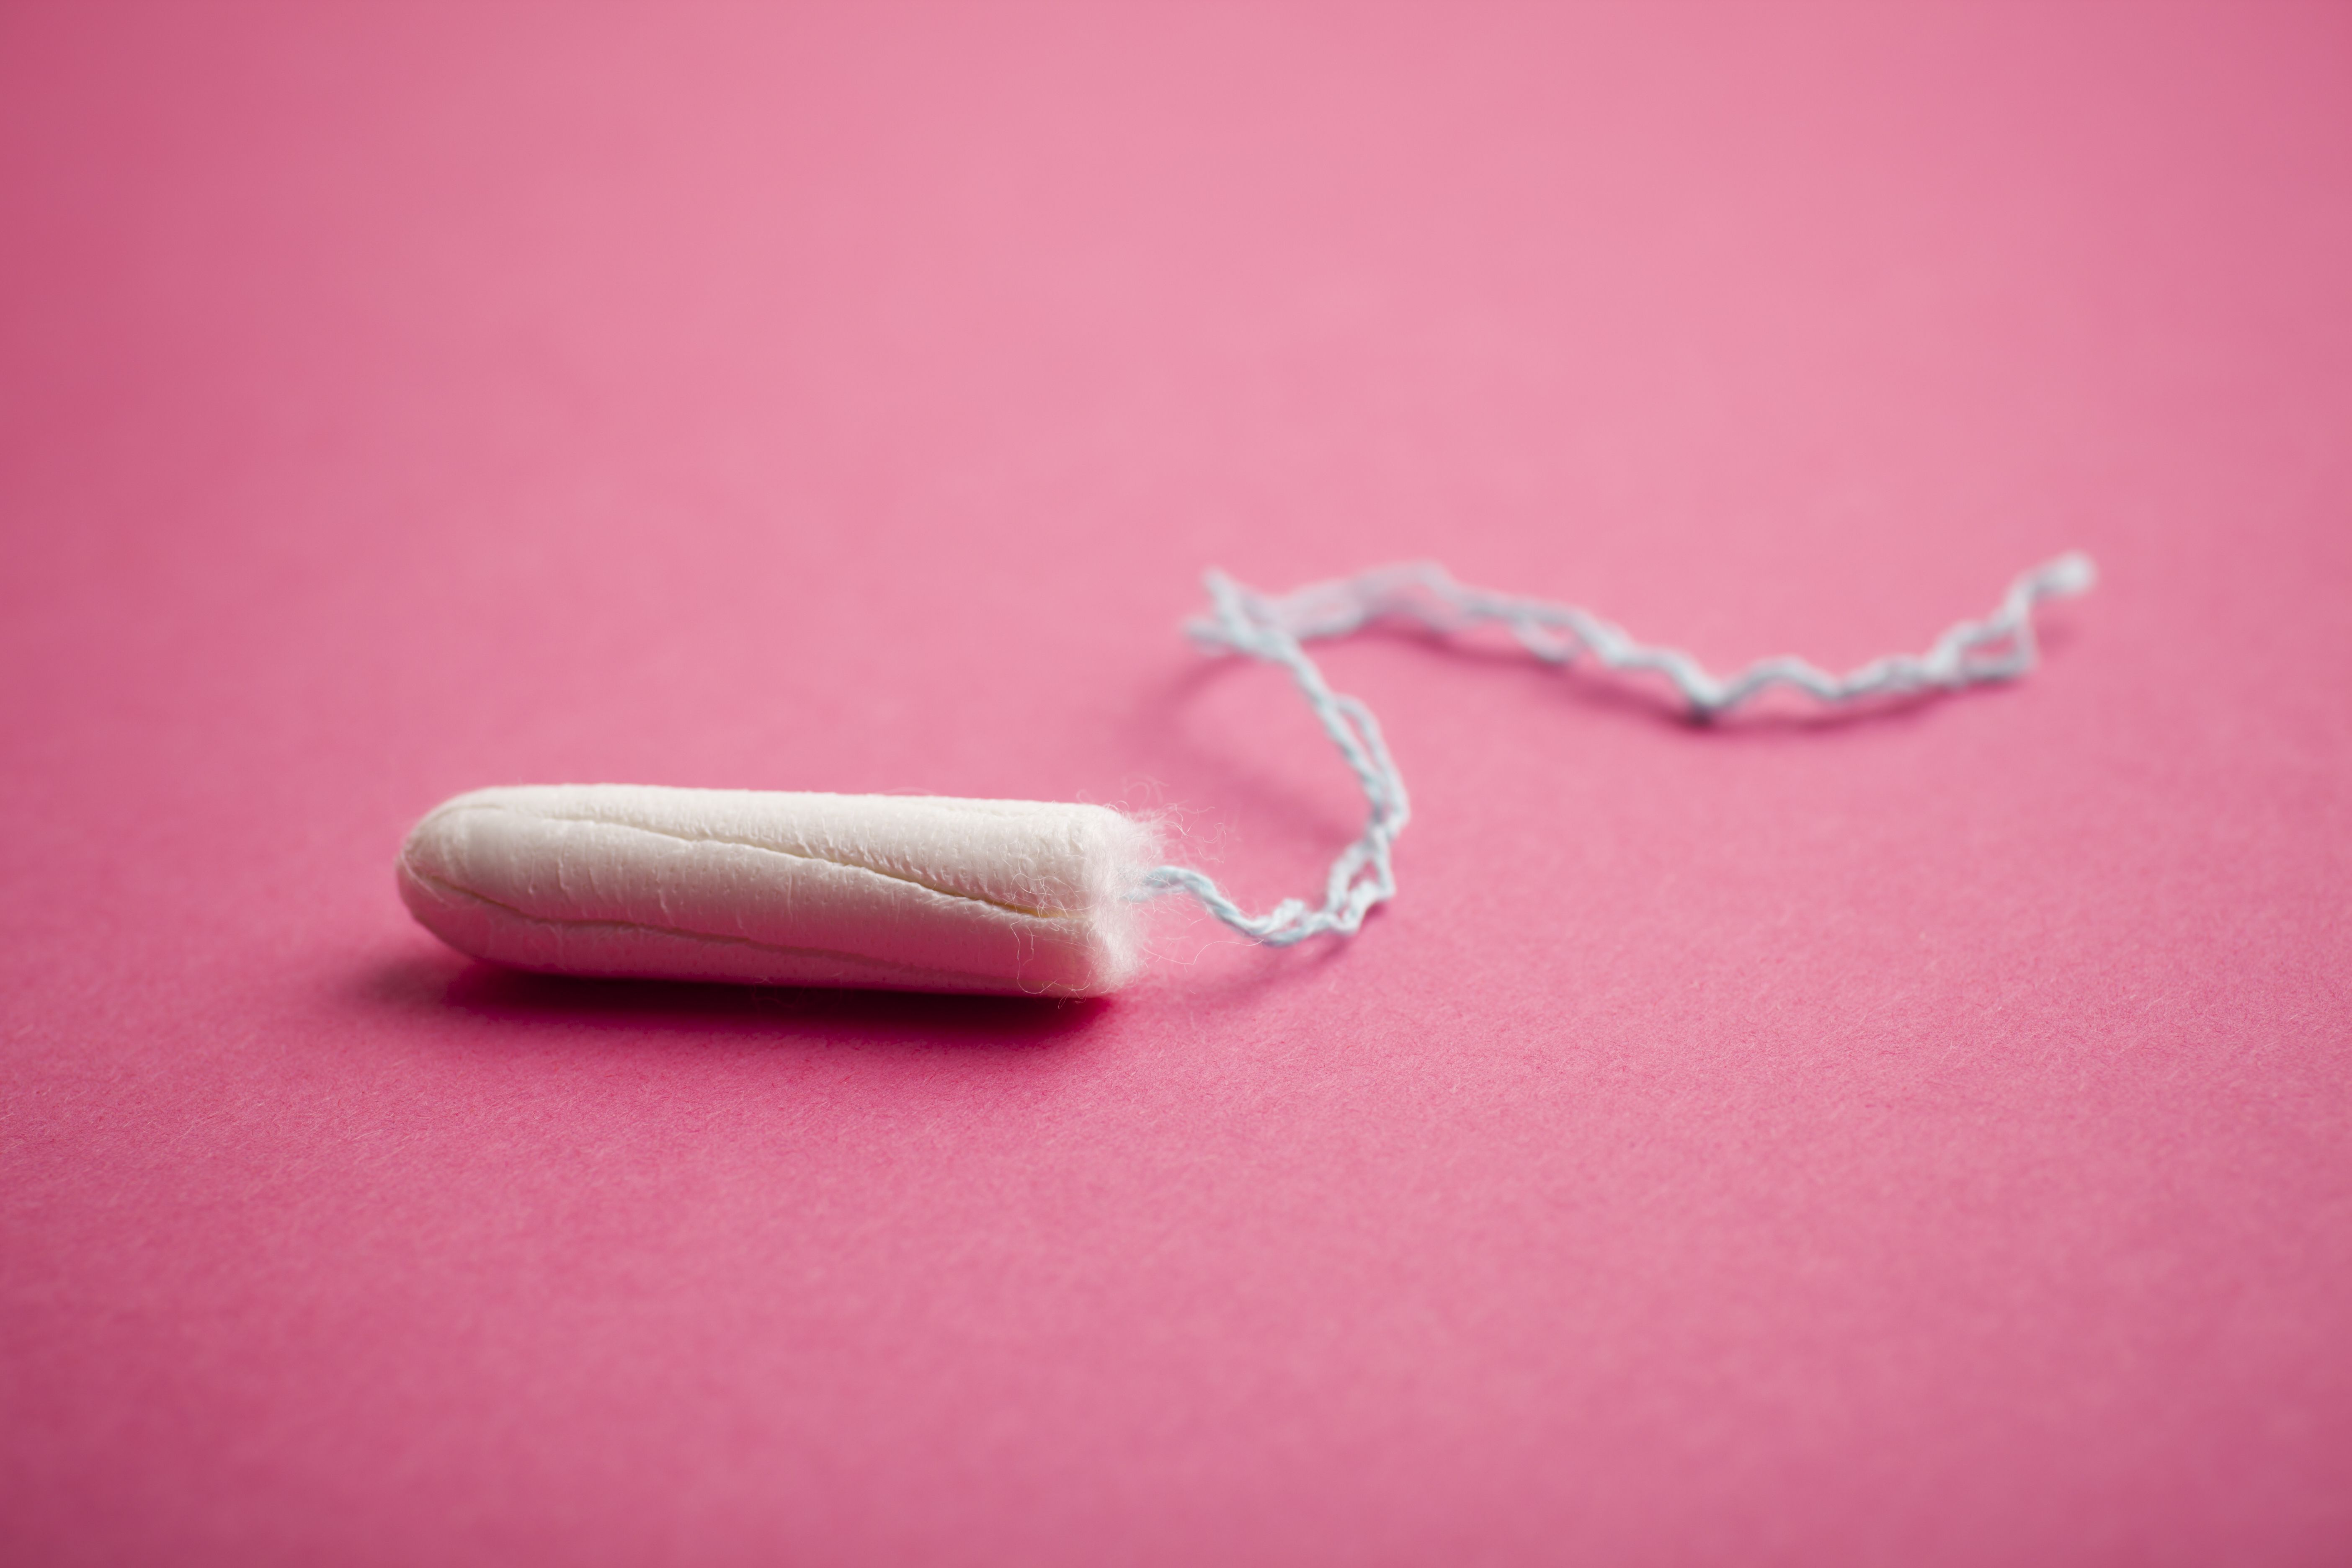 This bluetooth tampon will change everything about your periods pic